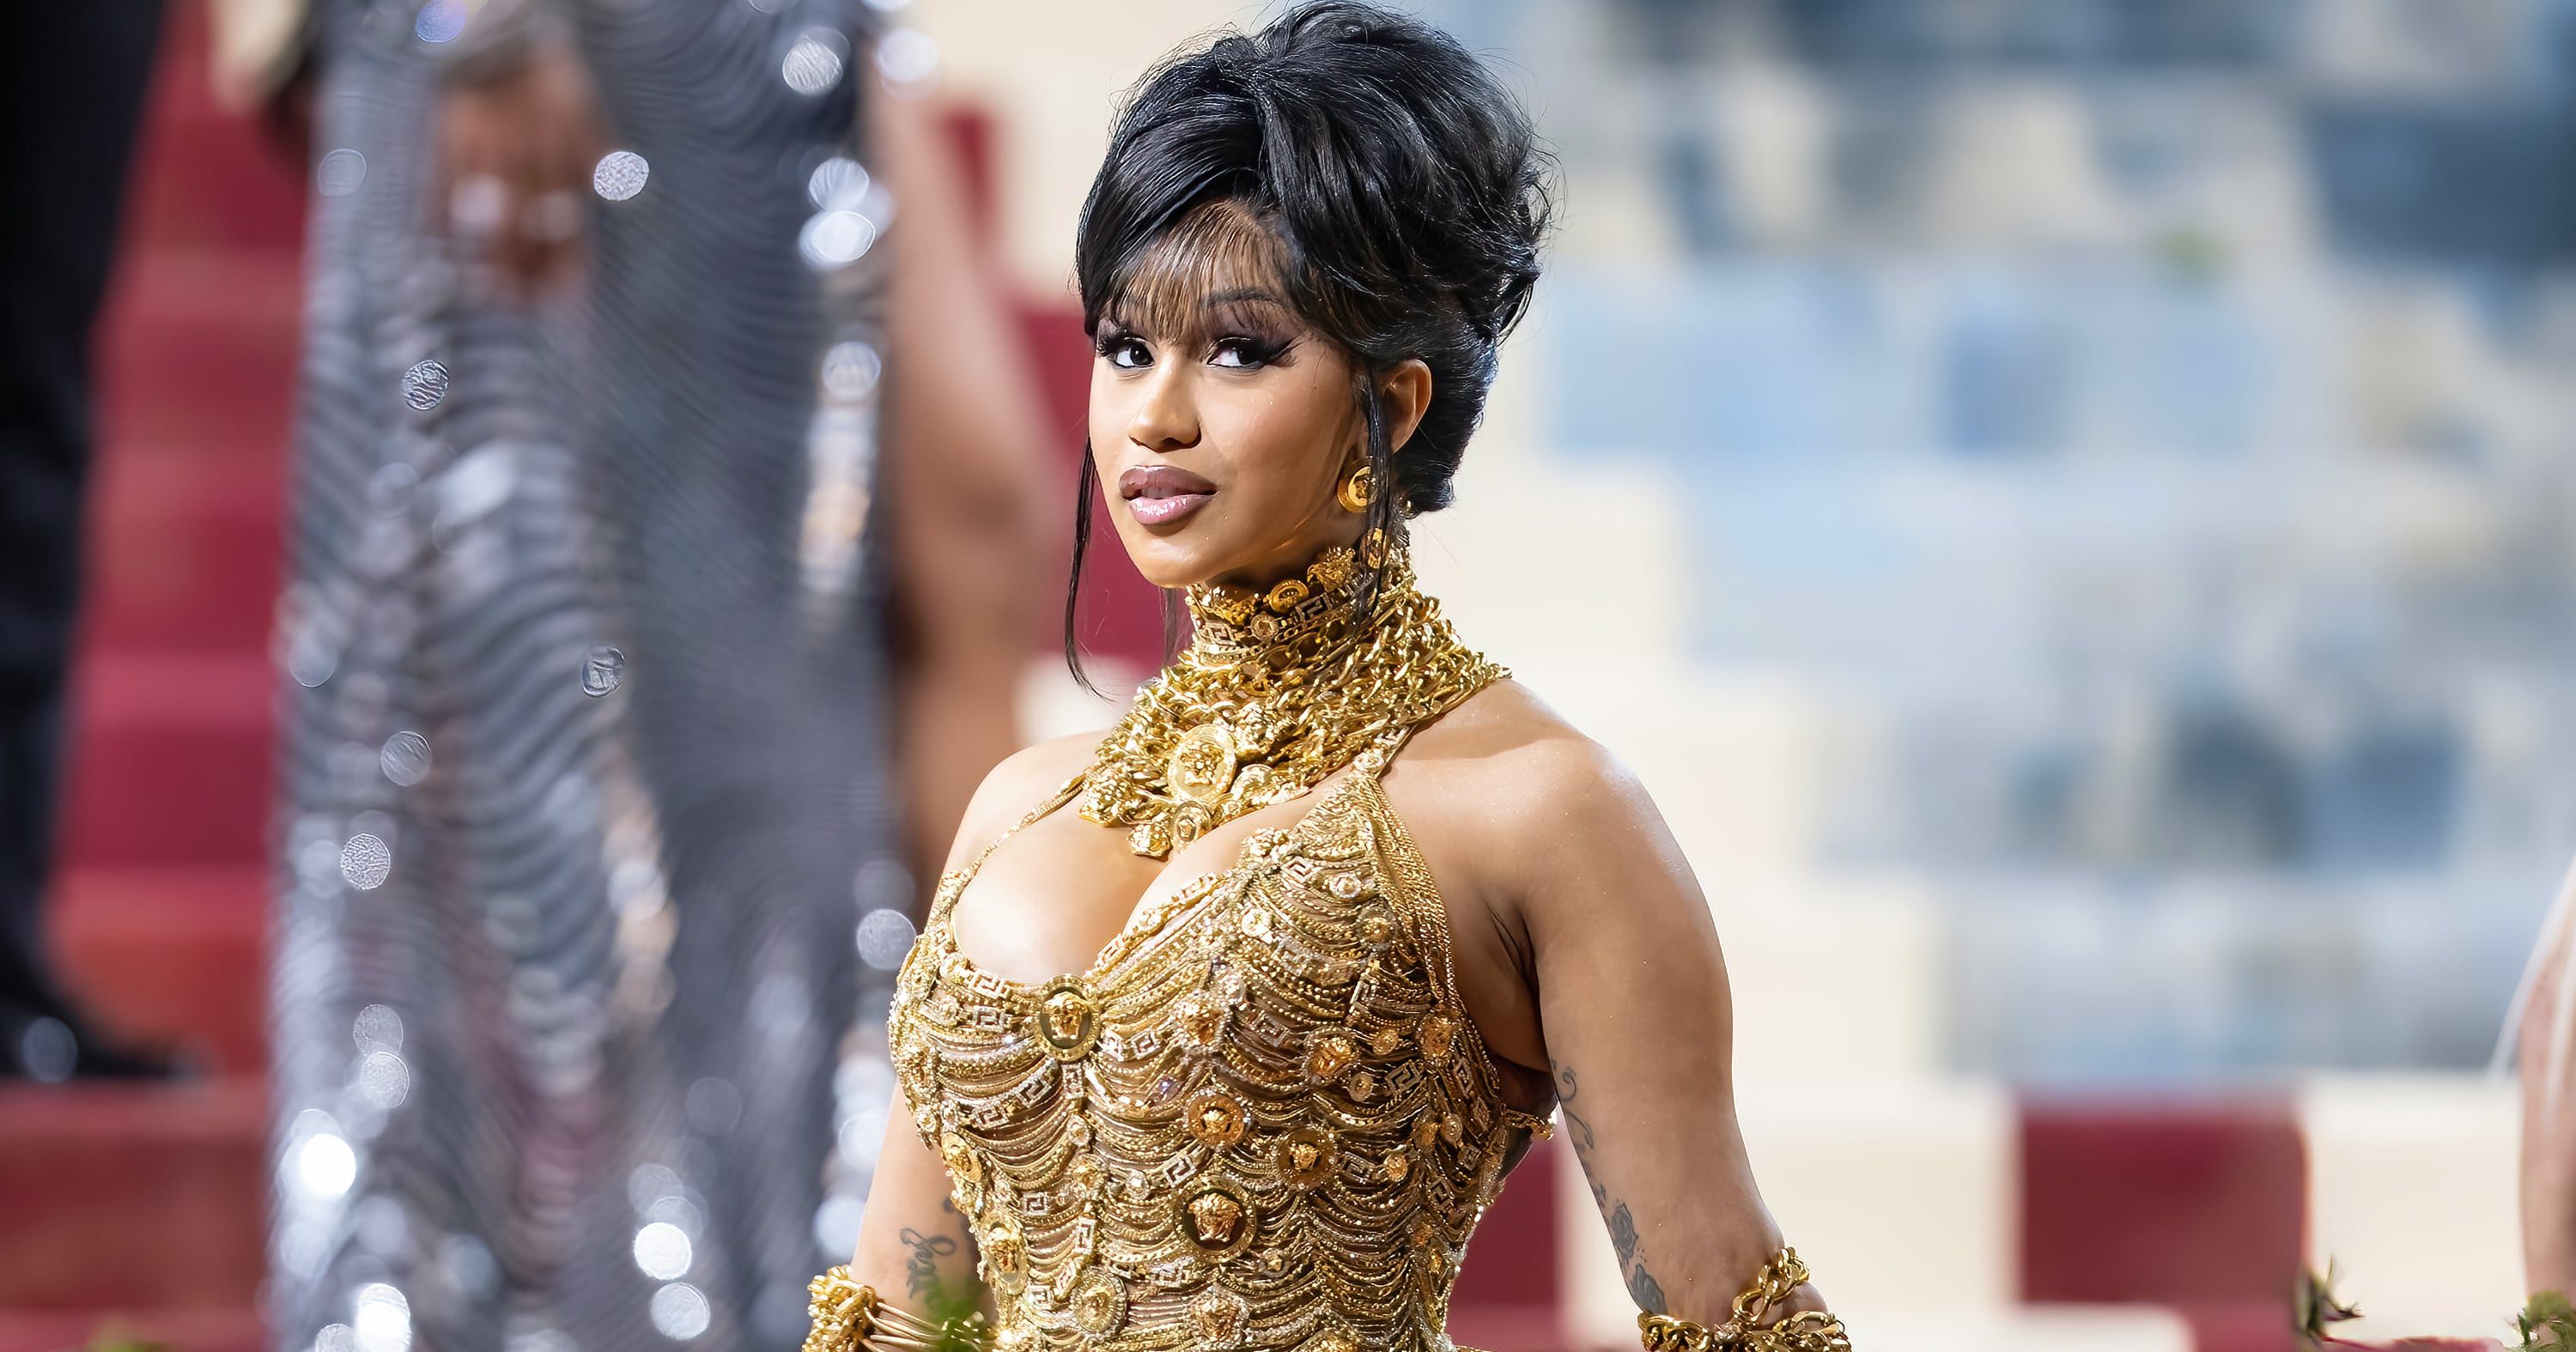 Cardi B’s Tattoos All Have Some Pretty Sweet Meanings